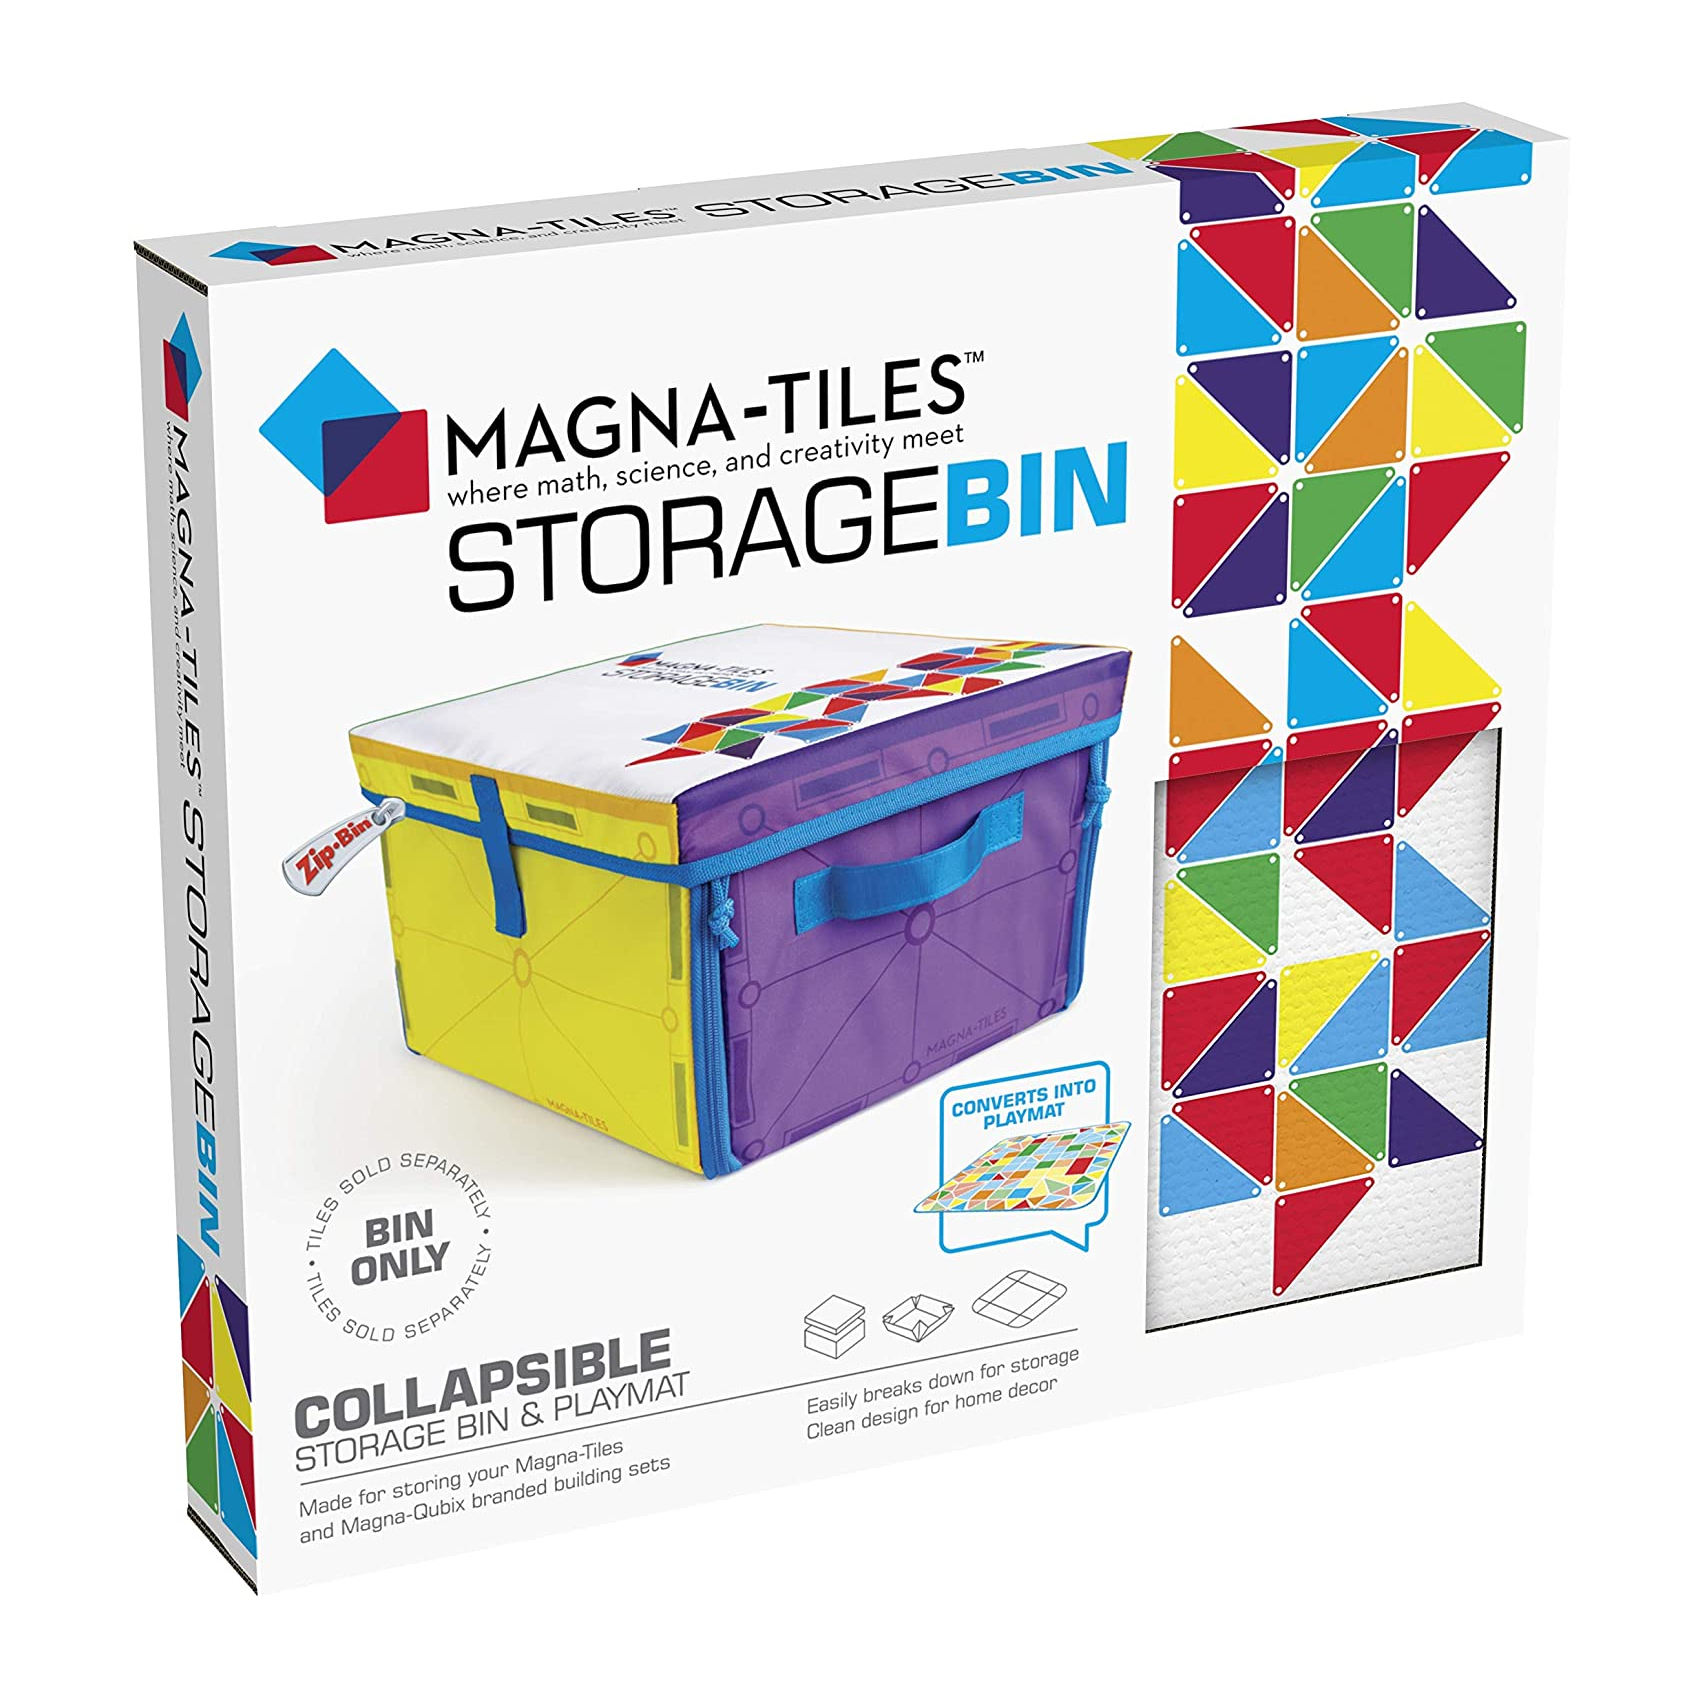 Magna-Tiles: Storage Bin & Playmat – Geppetto's Toy Box